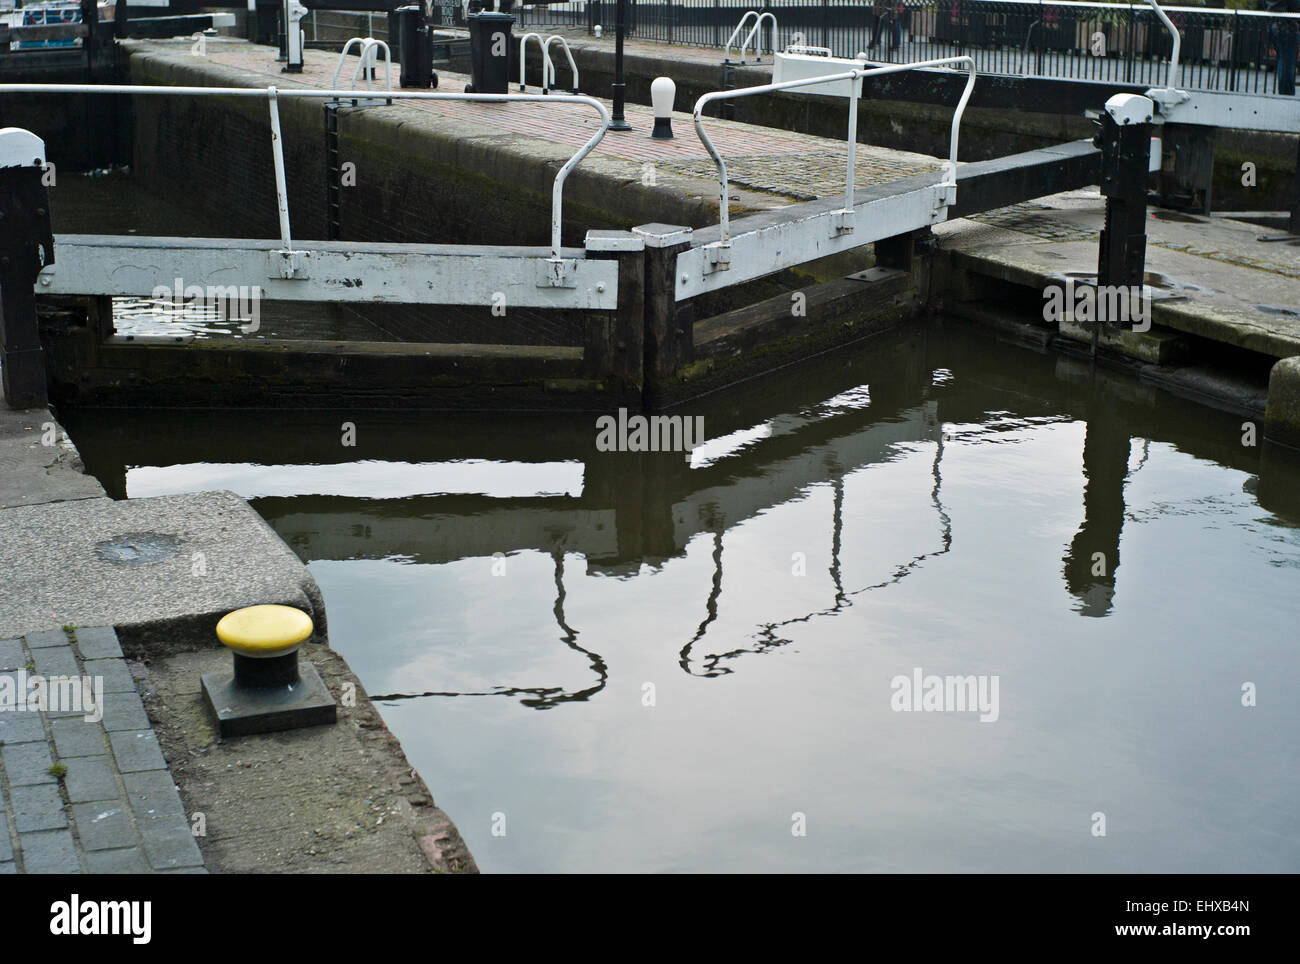 Camden town canal Lock gate with yellow cast iron mooring bollards painted yellow Stock Photo